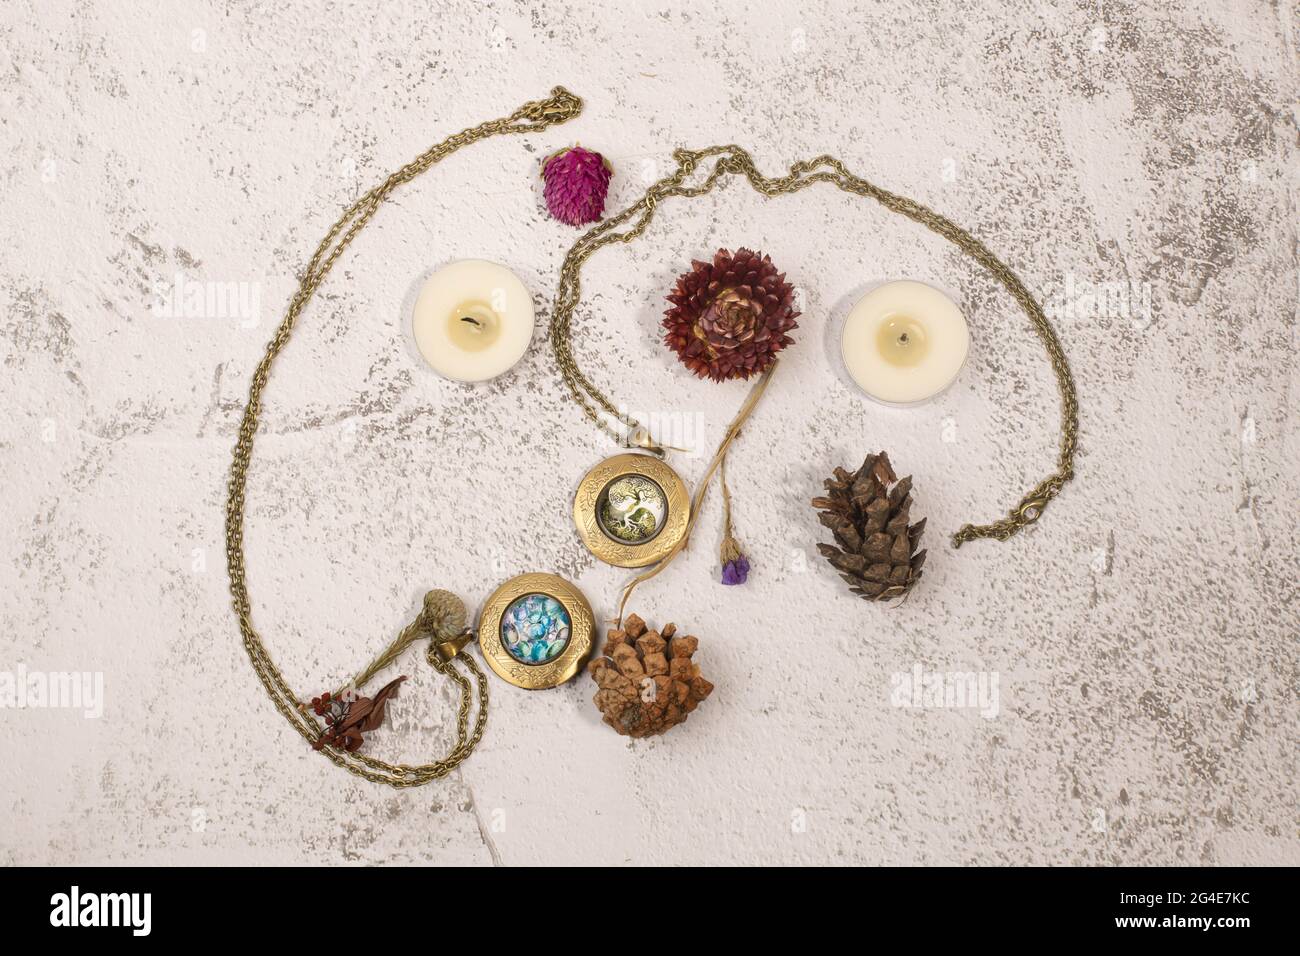 Flatlay with medallion, candles and dried flowers Stock Photo